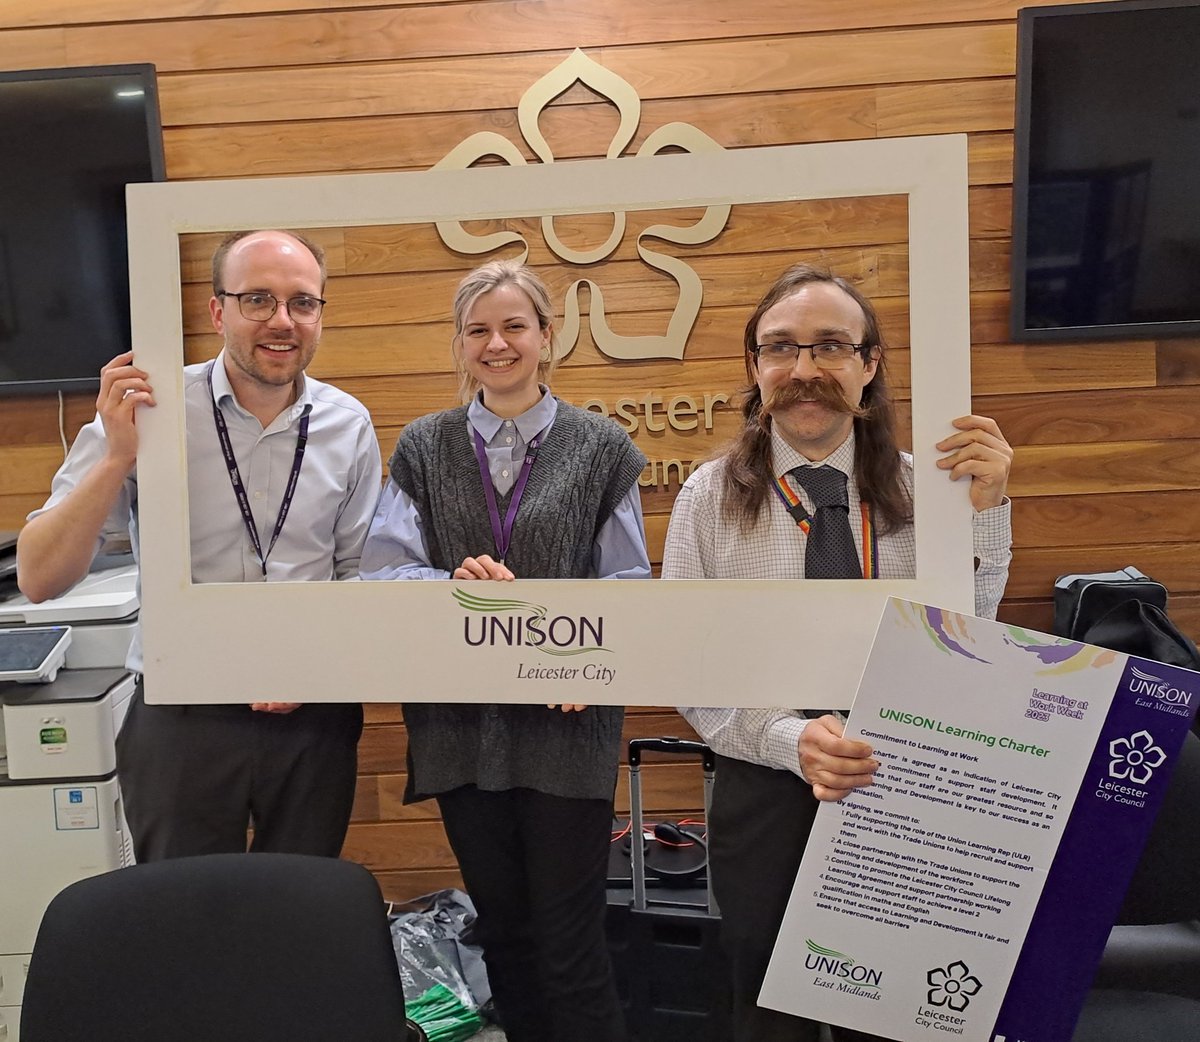 We're having a busy day at City Hall in Leicester, promoting learning opportunities such as @unisonlearning to staff as part of Learning at Work Week.

Plenty of interest, including recruiting new members!